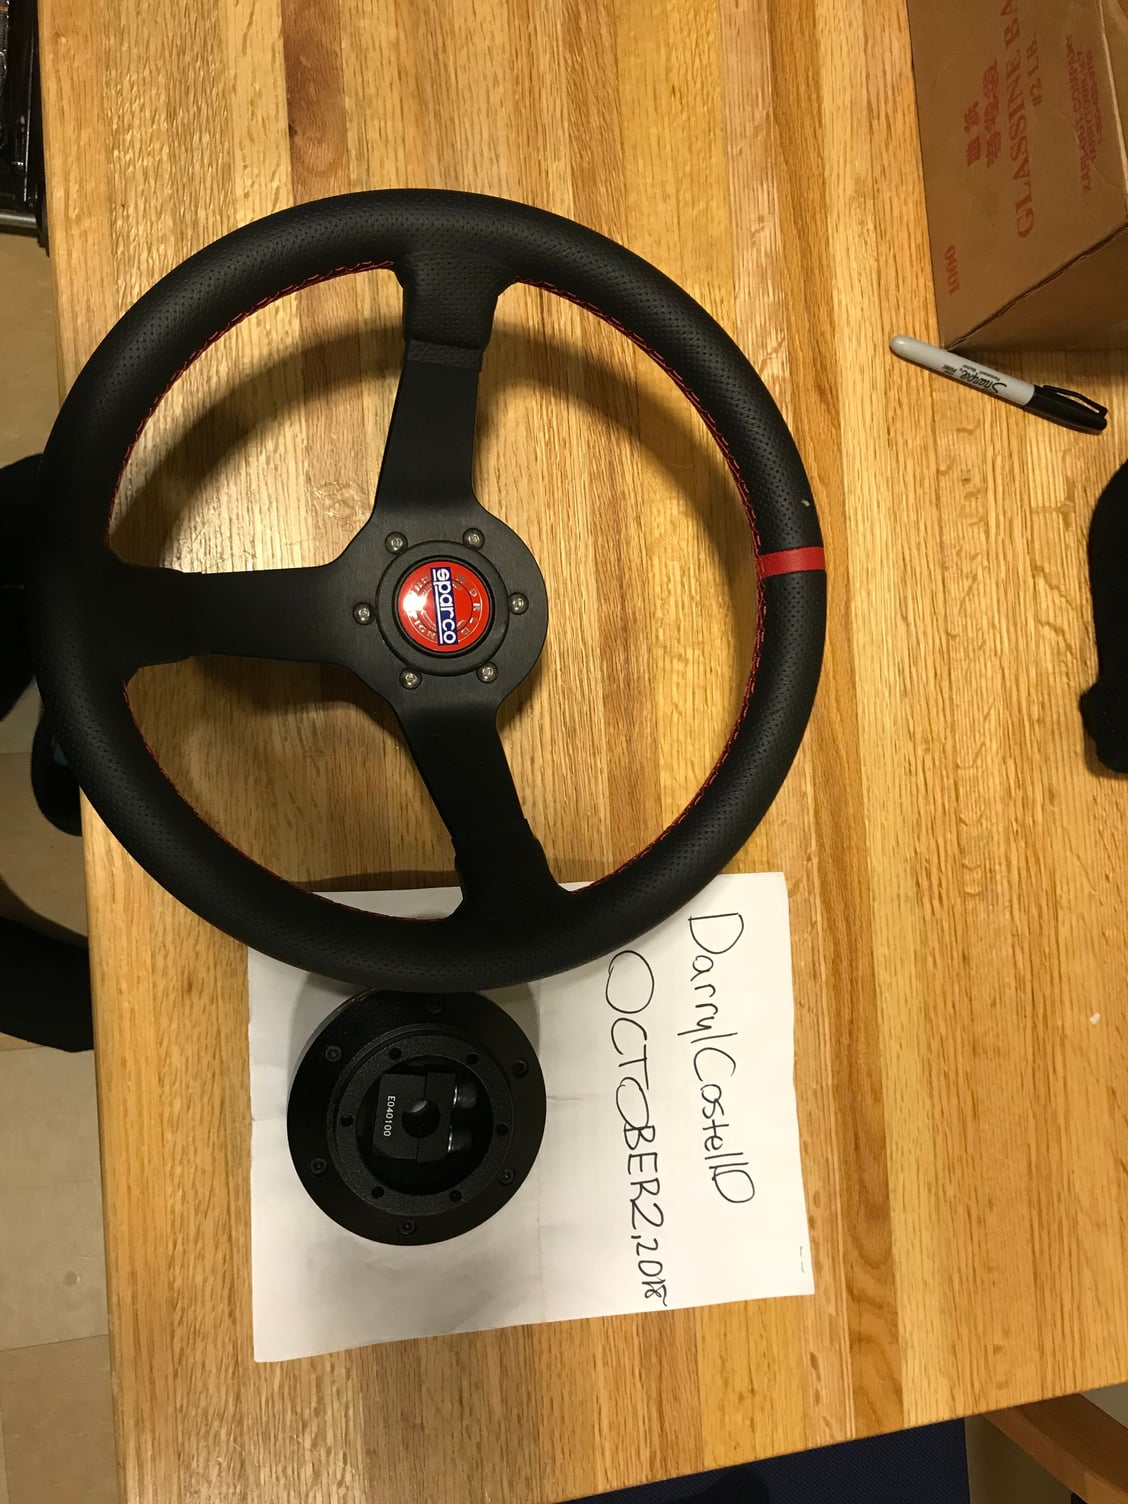 Interior/Upholstery - Sparco steering wheel with nrg quick release and hub - New - 2003 to 2007 Mitsubishi Lancer Evolution - Fort Bragg, NC 28310, United States